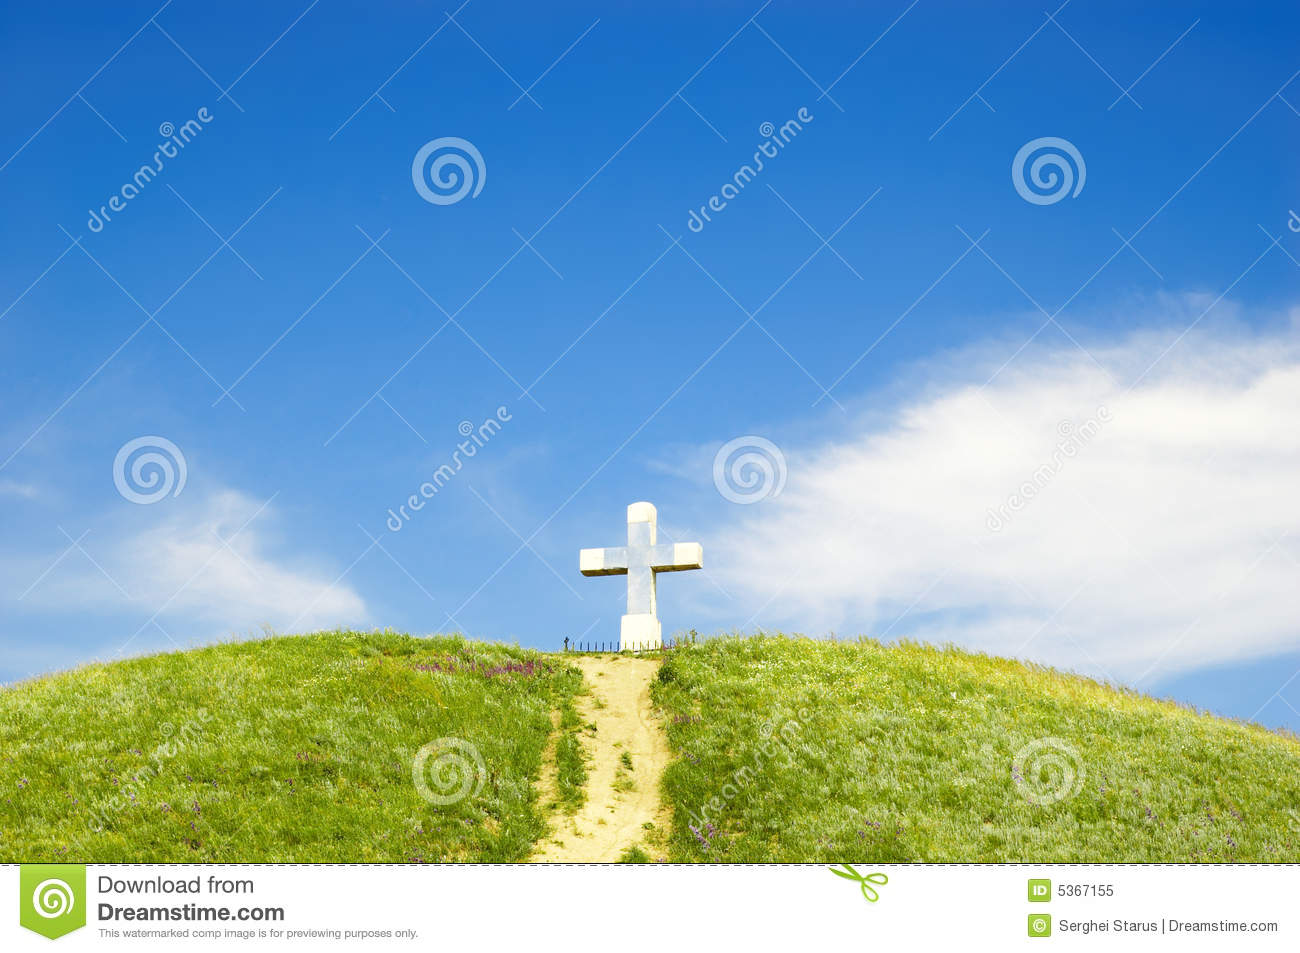 Path To The Cross Royalty Free Stock Photo   Image  5367155